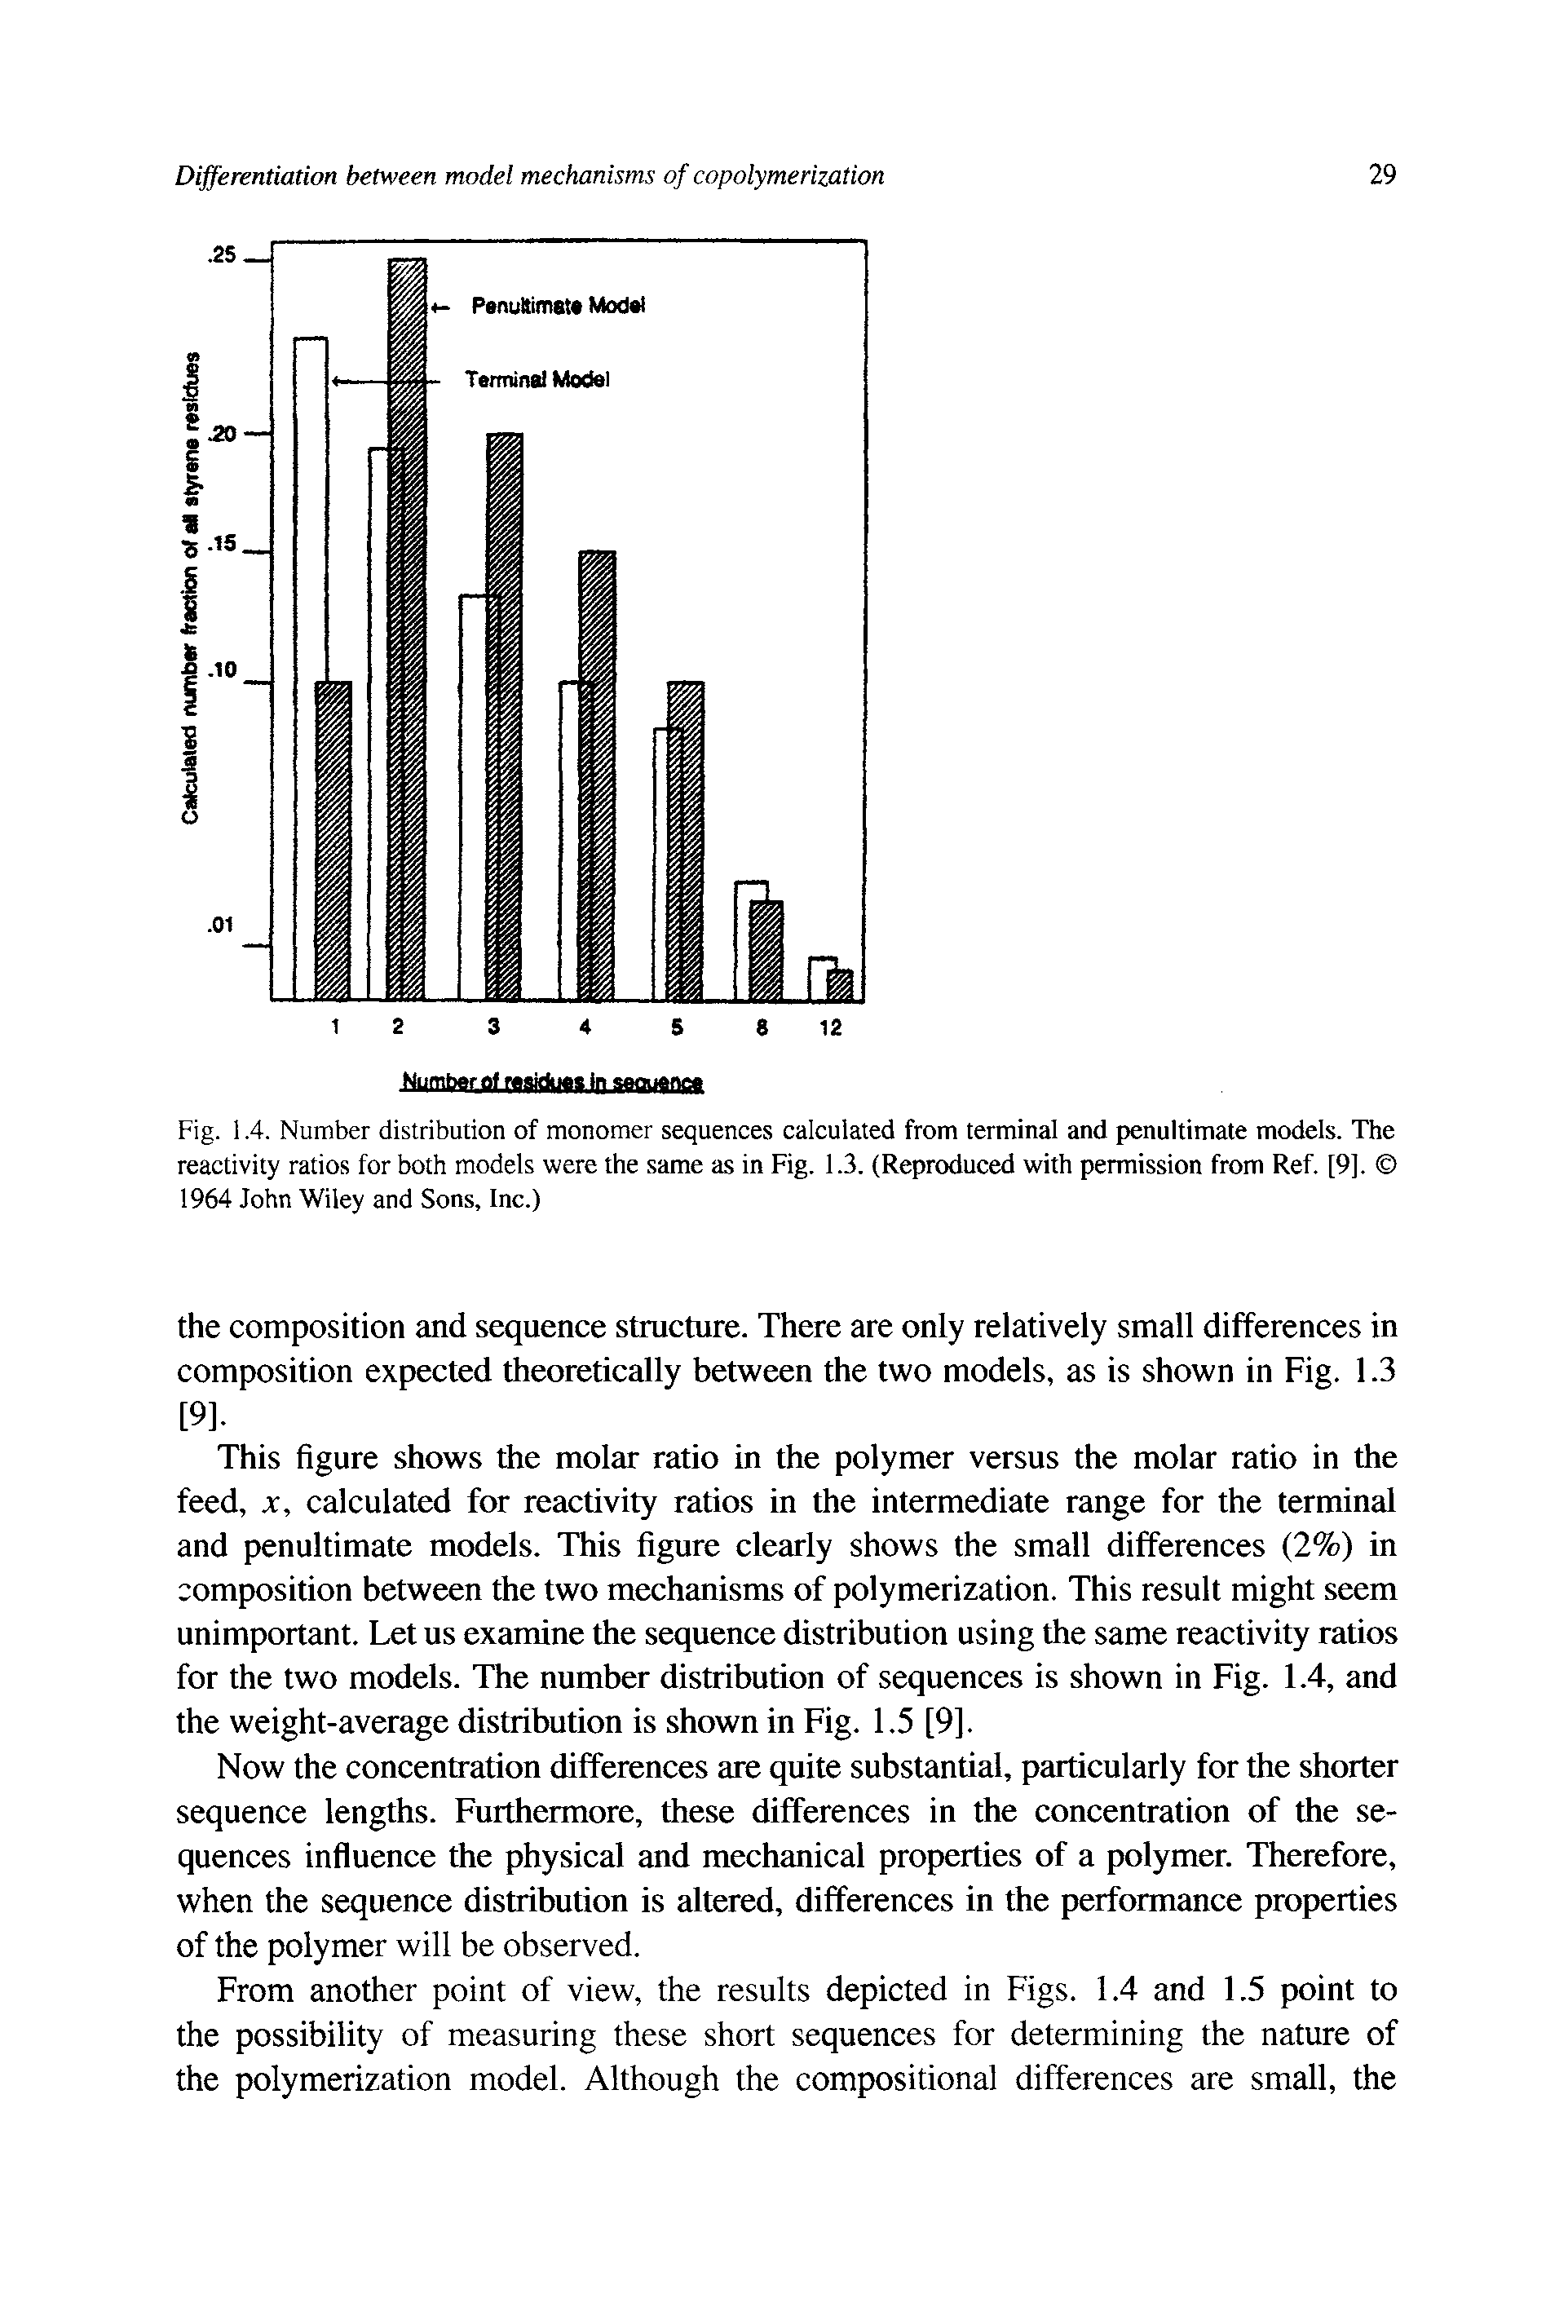 Fig. 1.4. Number distribution of monomer sequences calculated from terminal and penultimate models. The reactivity ratios for both models were the same as in Fig. 1.3. (Reproduced with permission from Ref. [9]. 1964 John Wiley and Sons, Inc.)...